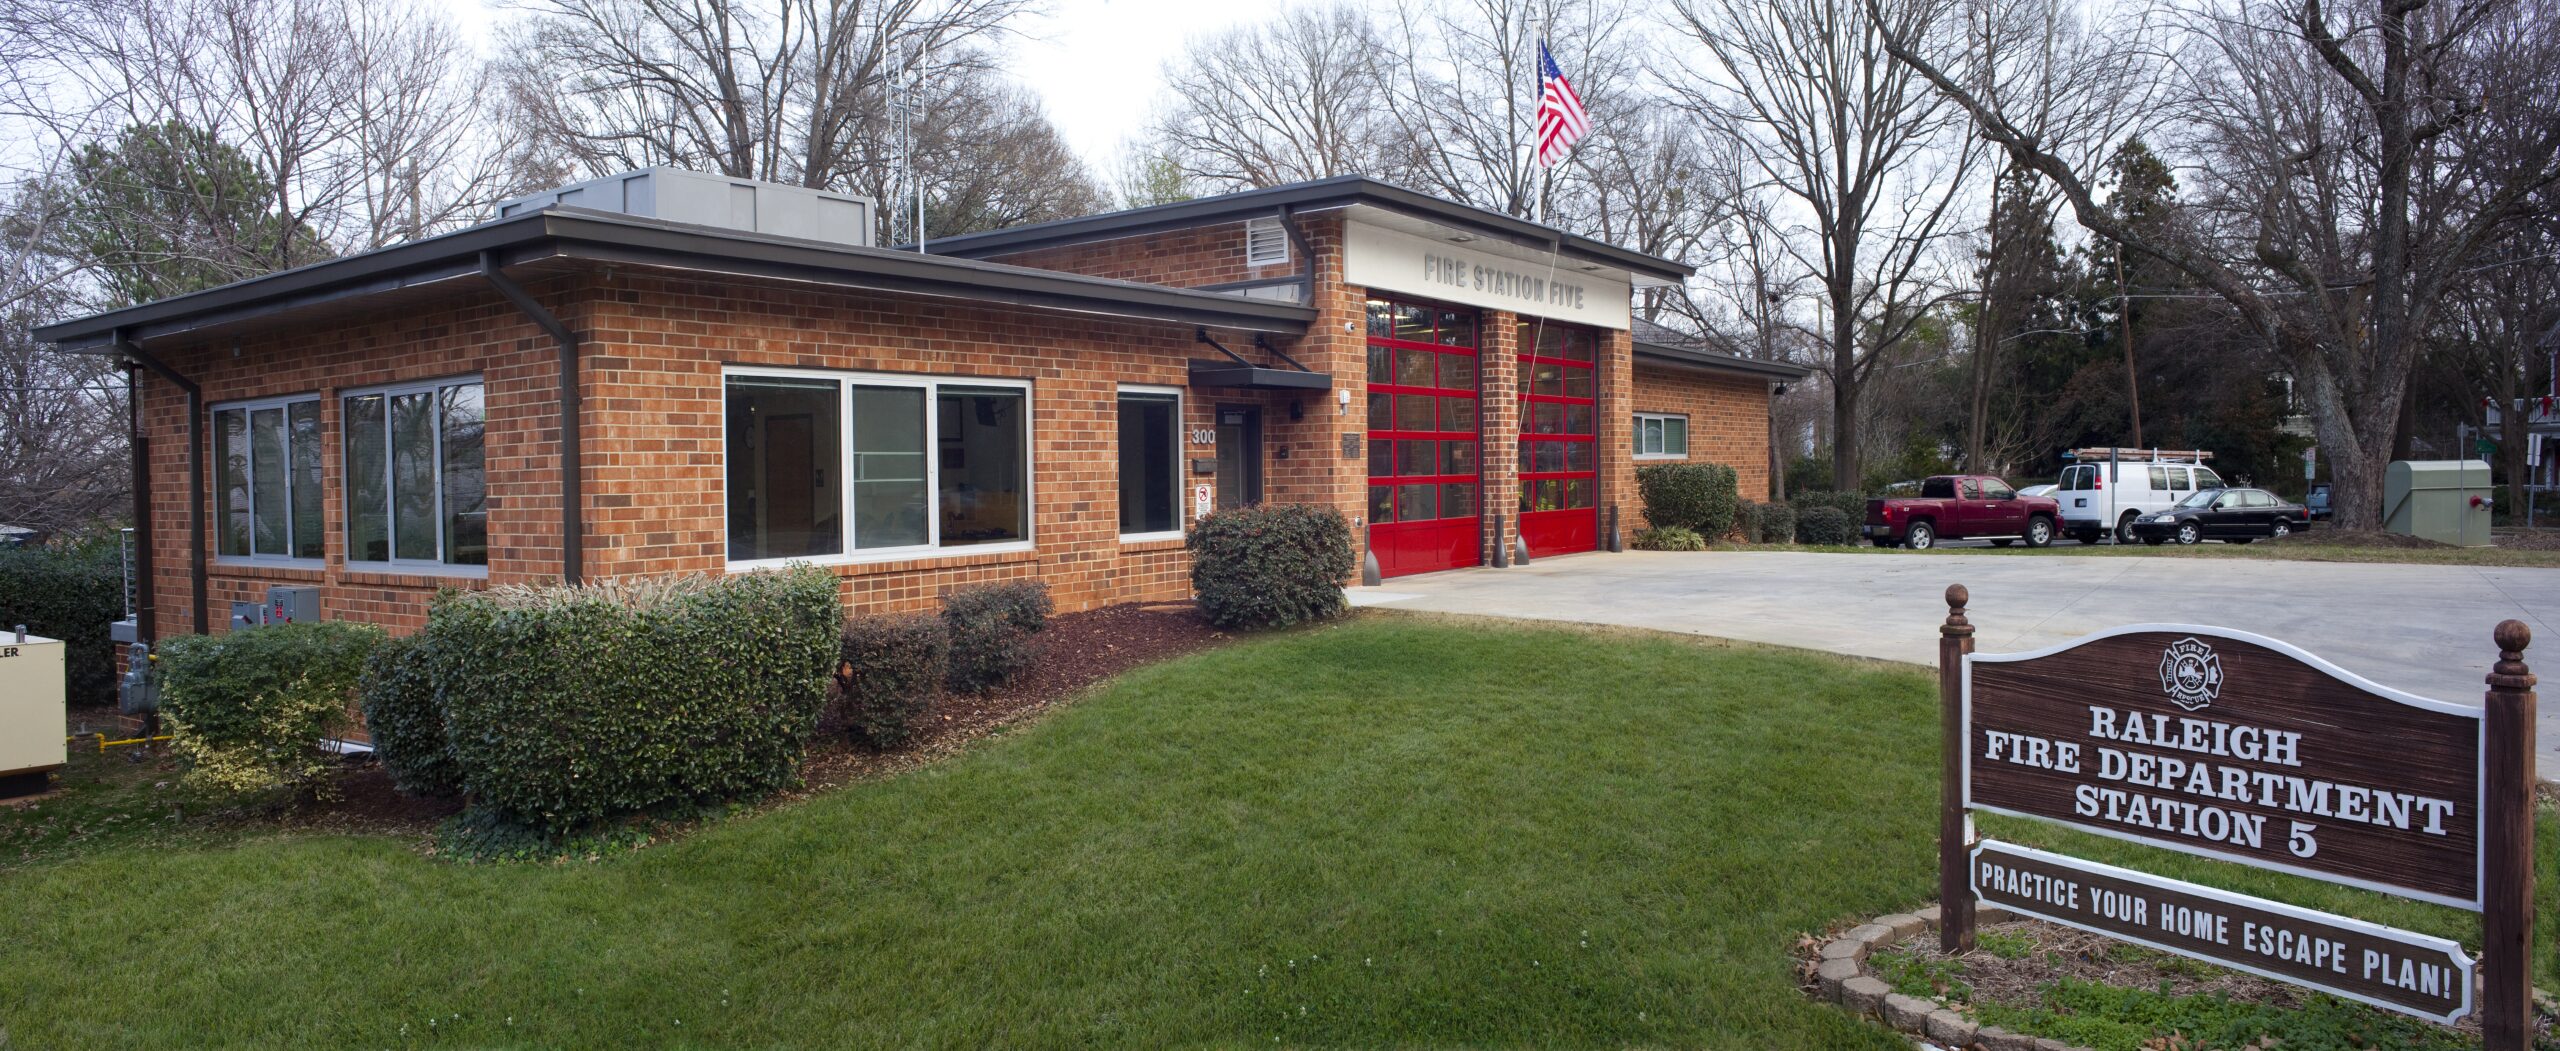 Raleigh Fire Station No. 5